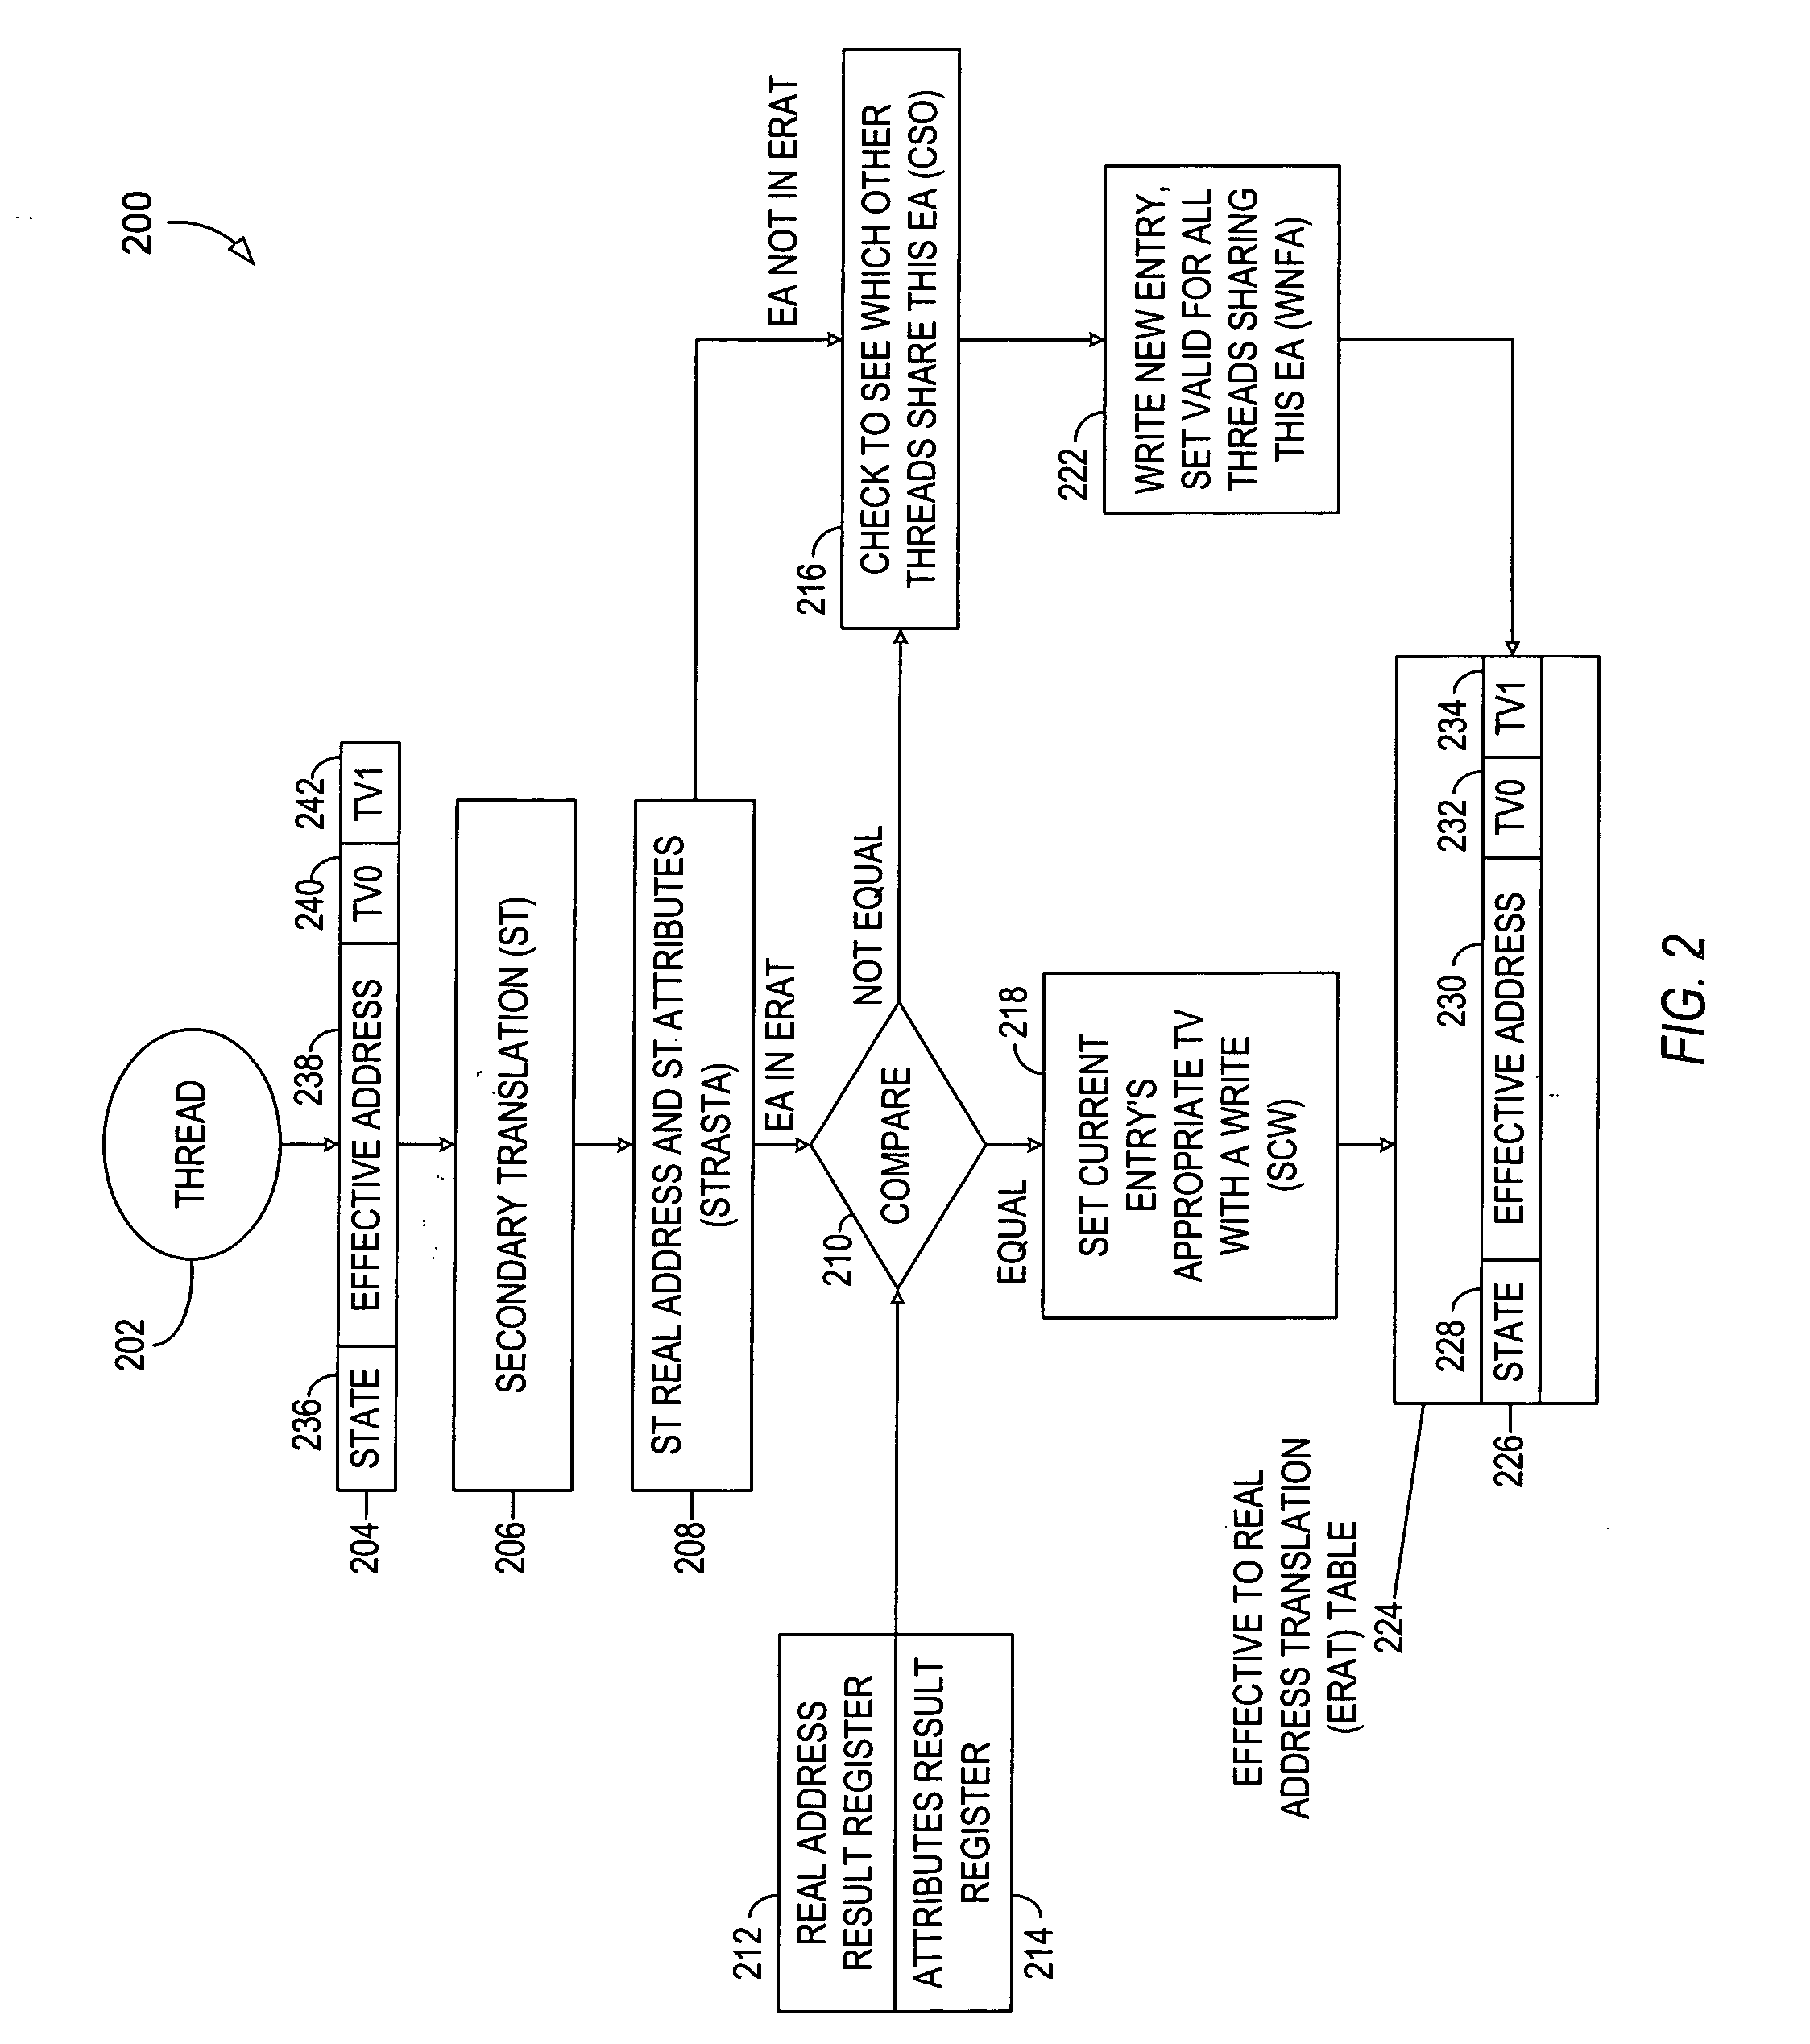 Method of effective to real address translation for a multi-threaded microprocessor